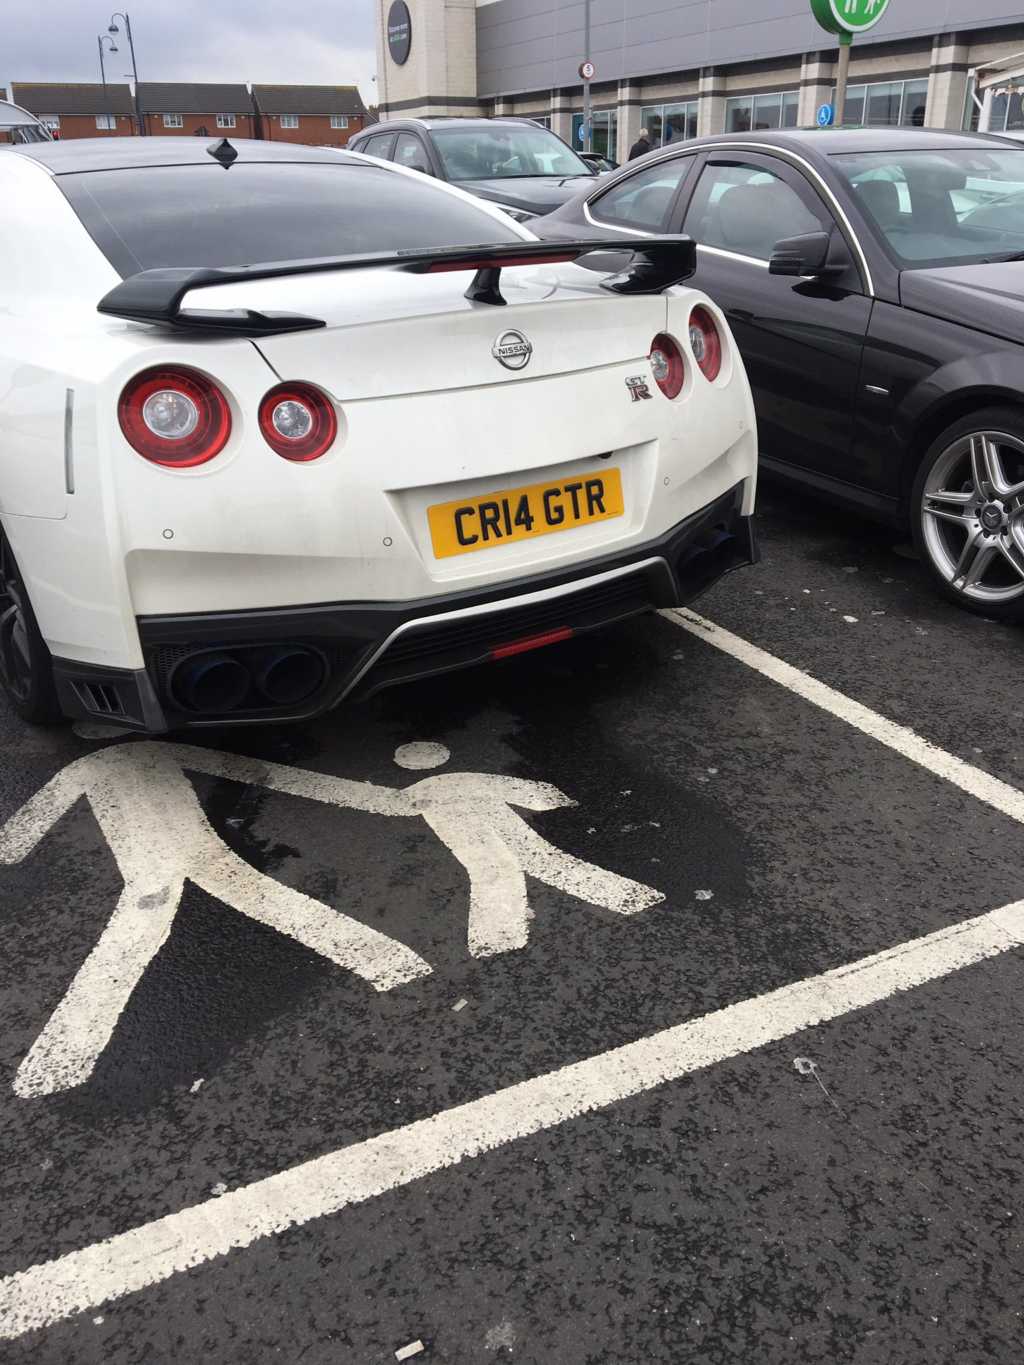 CR14 GTR displaying Inconsiderate Parking